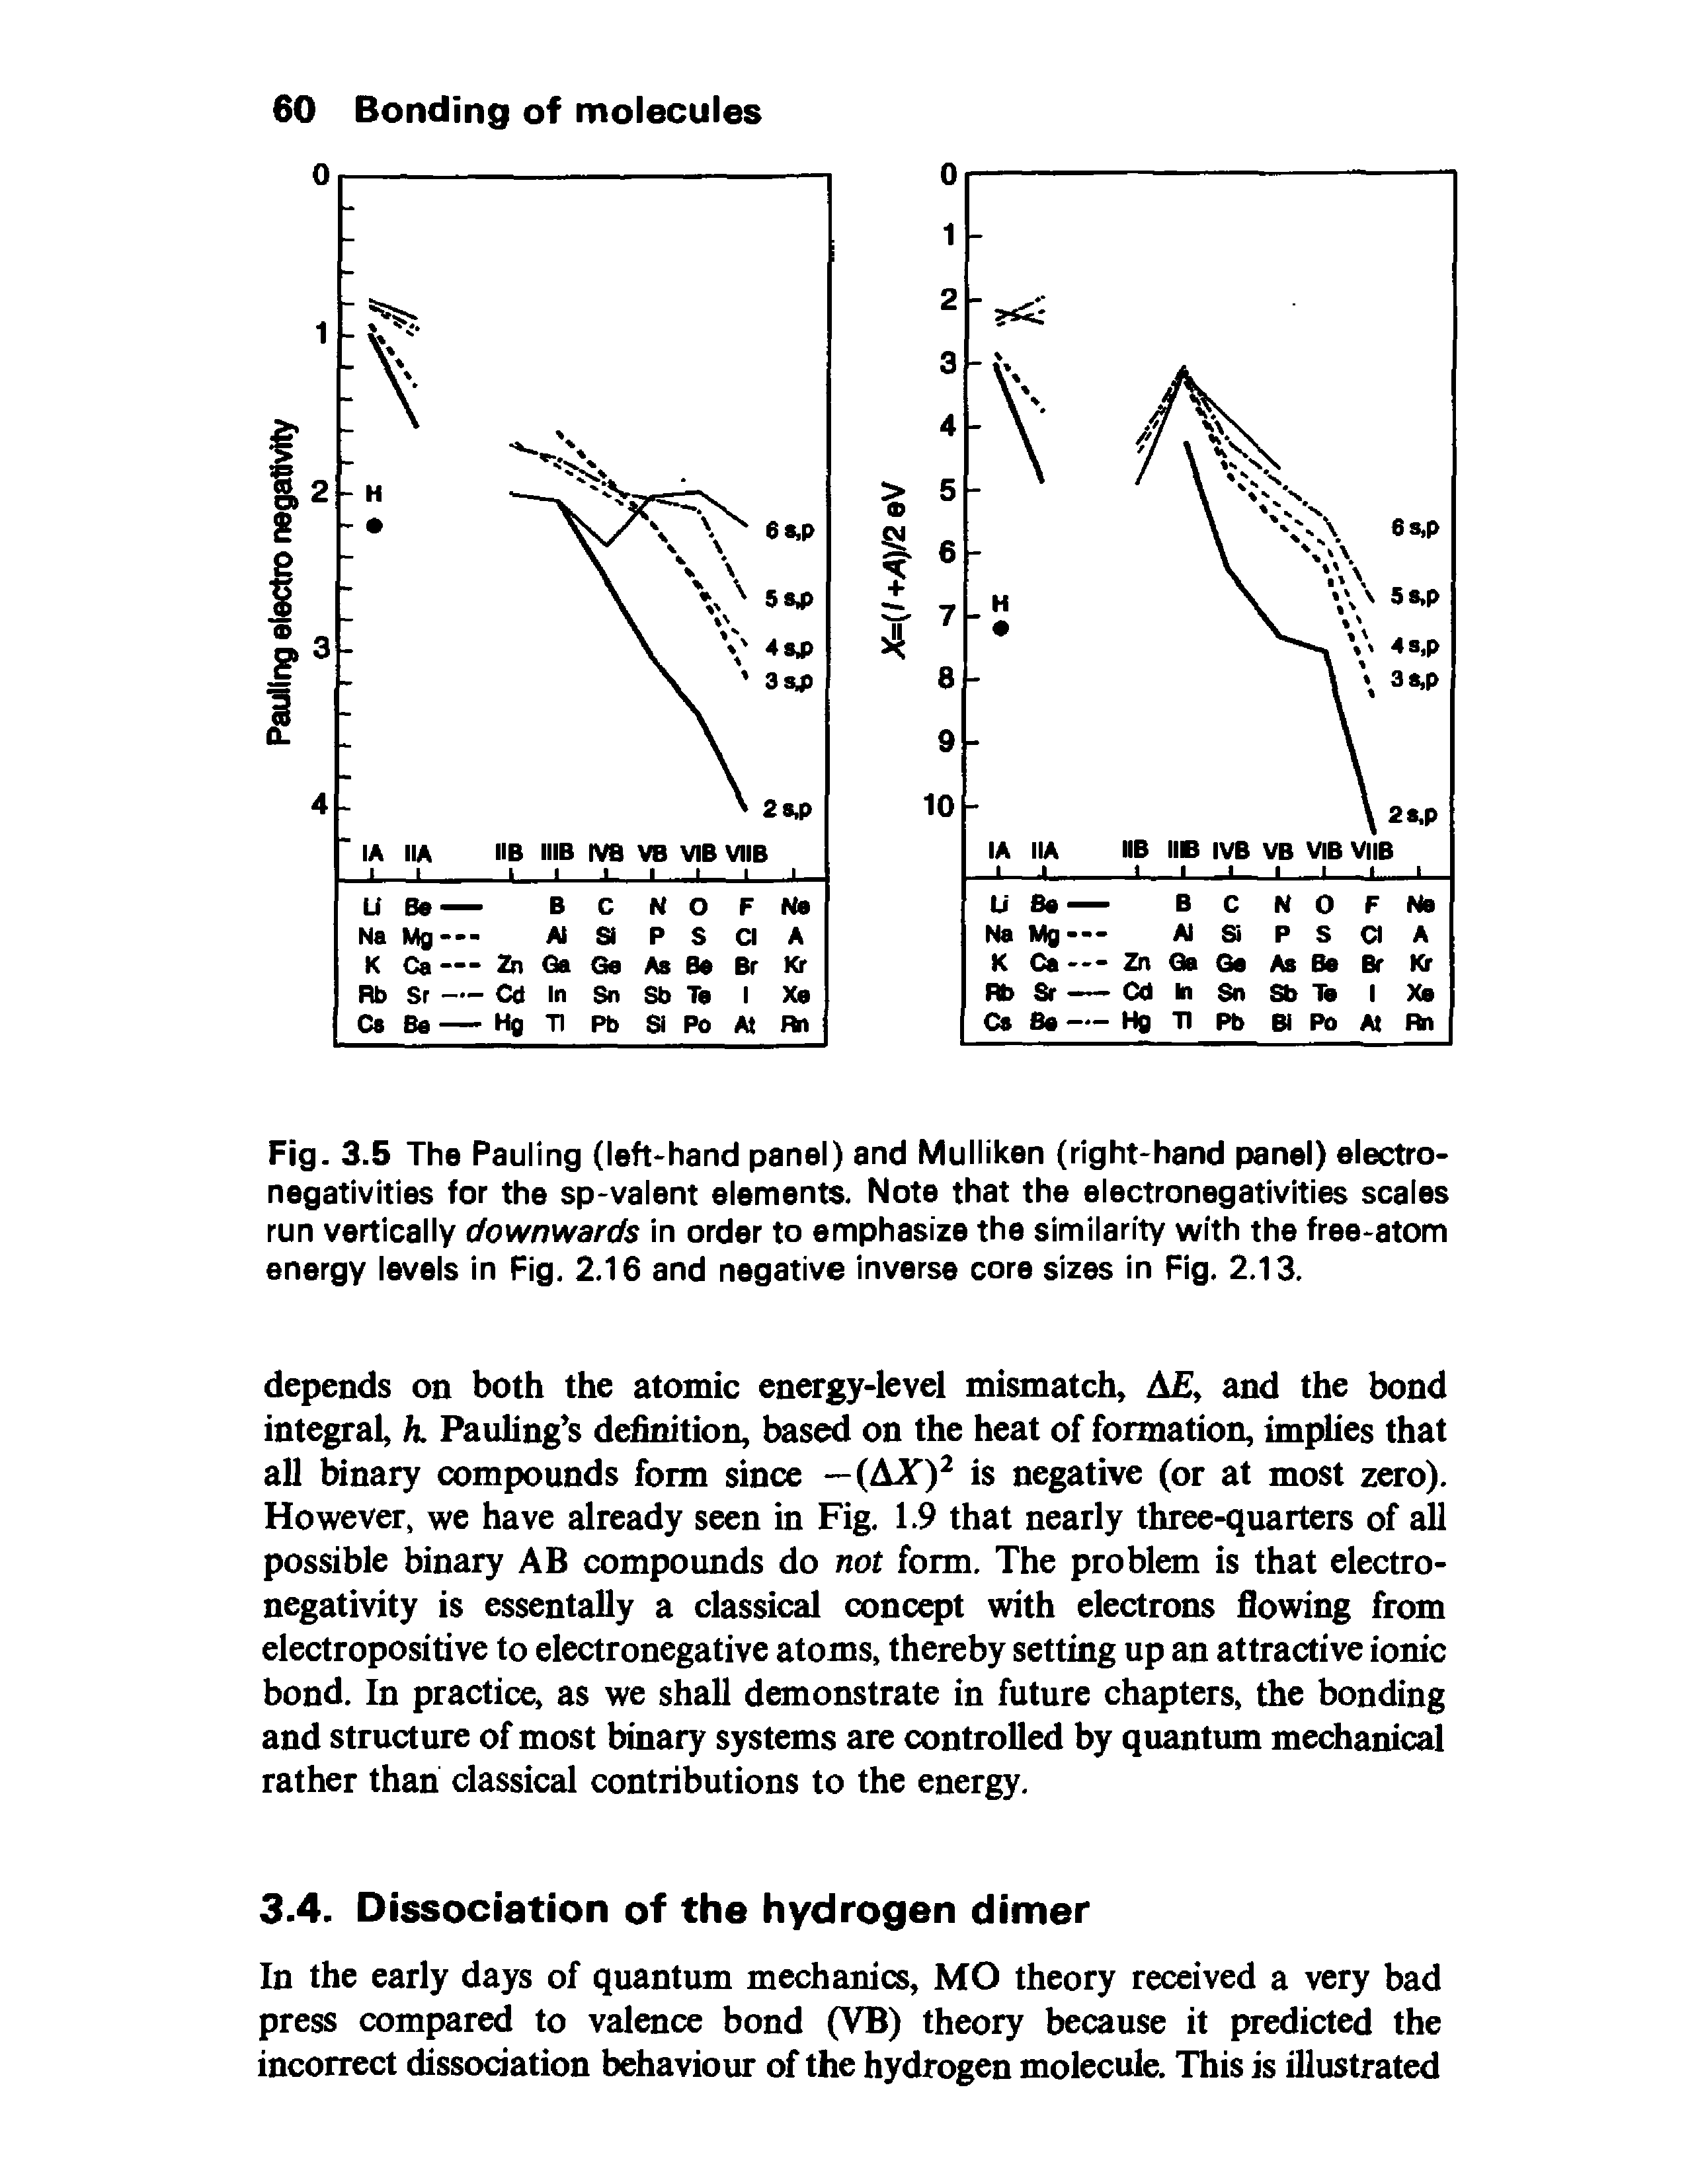 Fig. 3.5 The Pauling (left-hand panel) and Mulliken (right-hand panel) electronegativities for the sp-valent elements. Note that the electronegativities scales run vertically downwards in order to emphasize the similarity with the free-atom energy levels in Fig. 2.16 and negative inverse core sizes in Fig. 2.13.